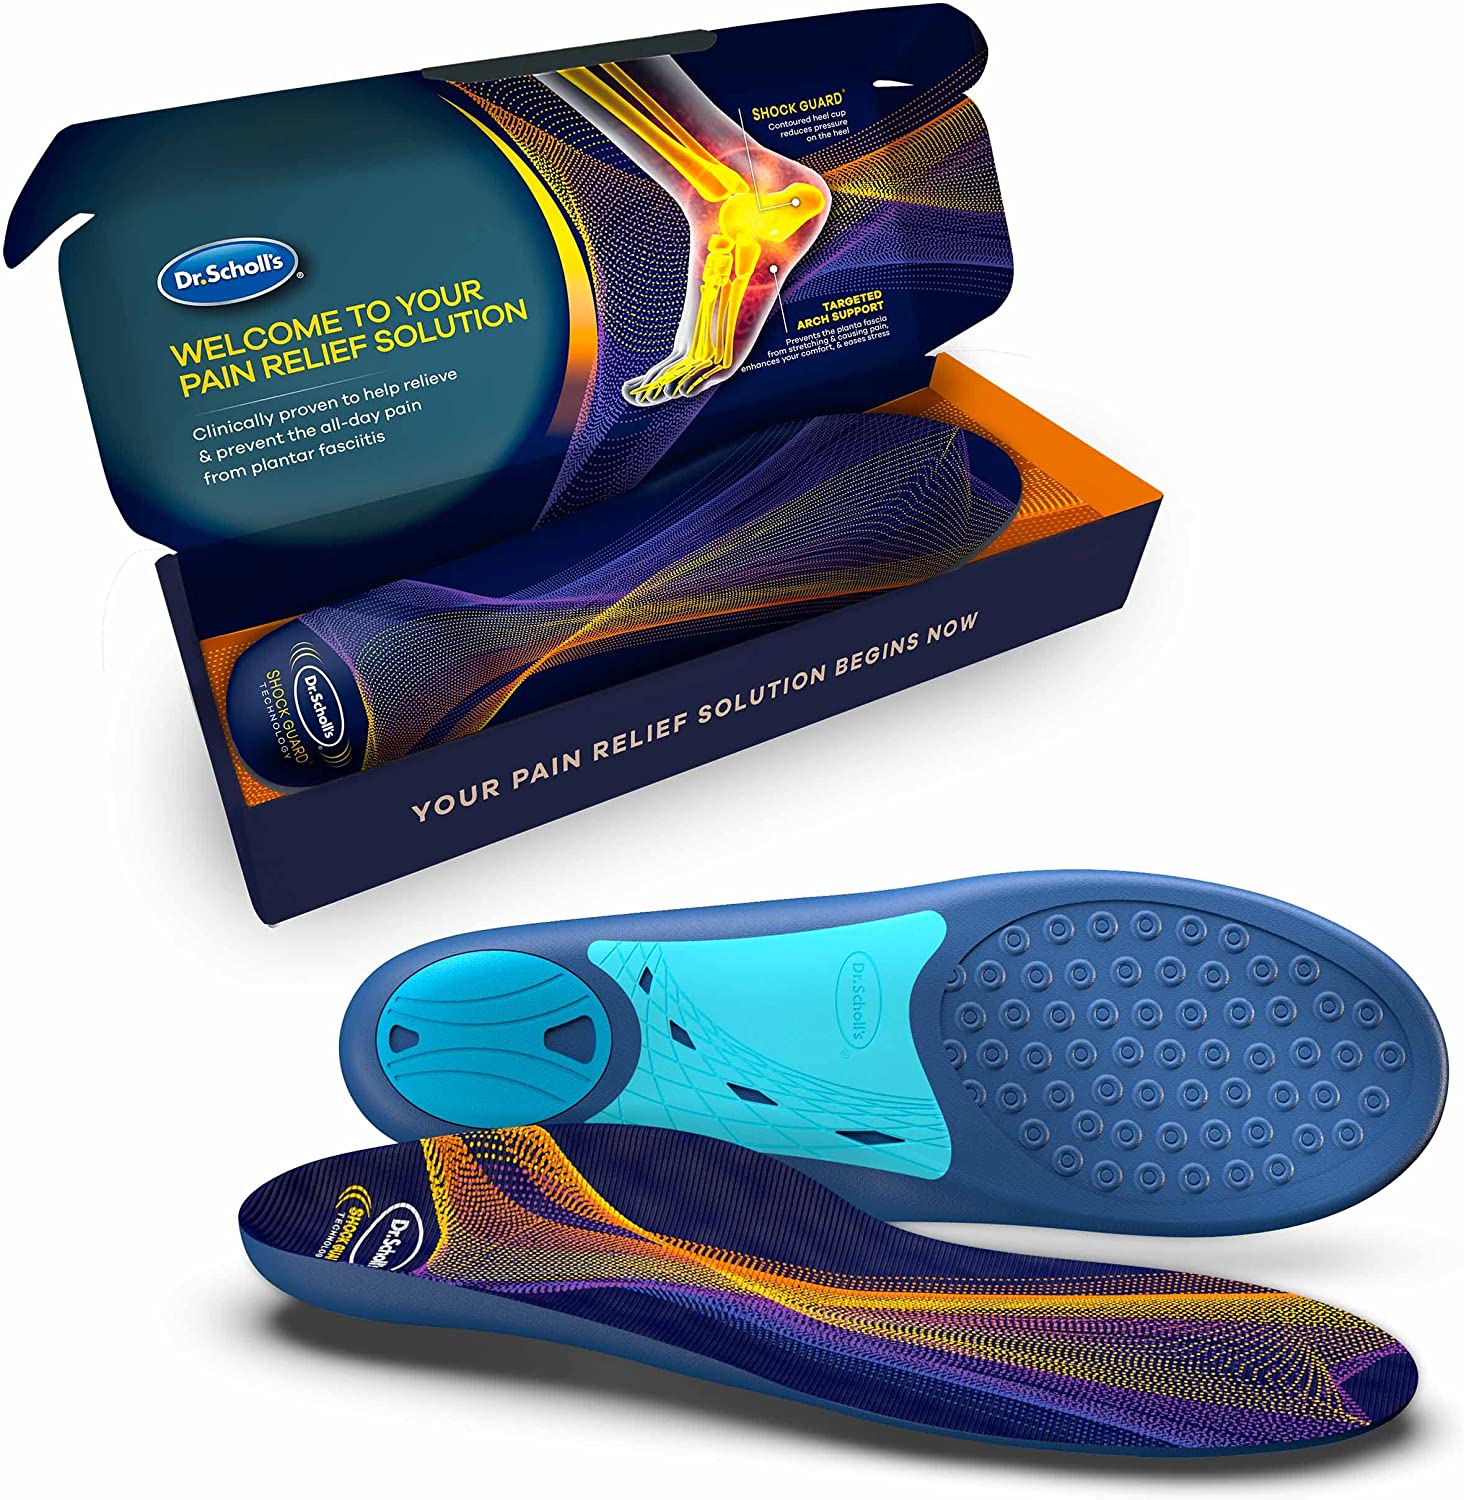 Dr. Scholl's Plantar Fasciitis Sized to Fit Pain [...]